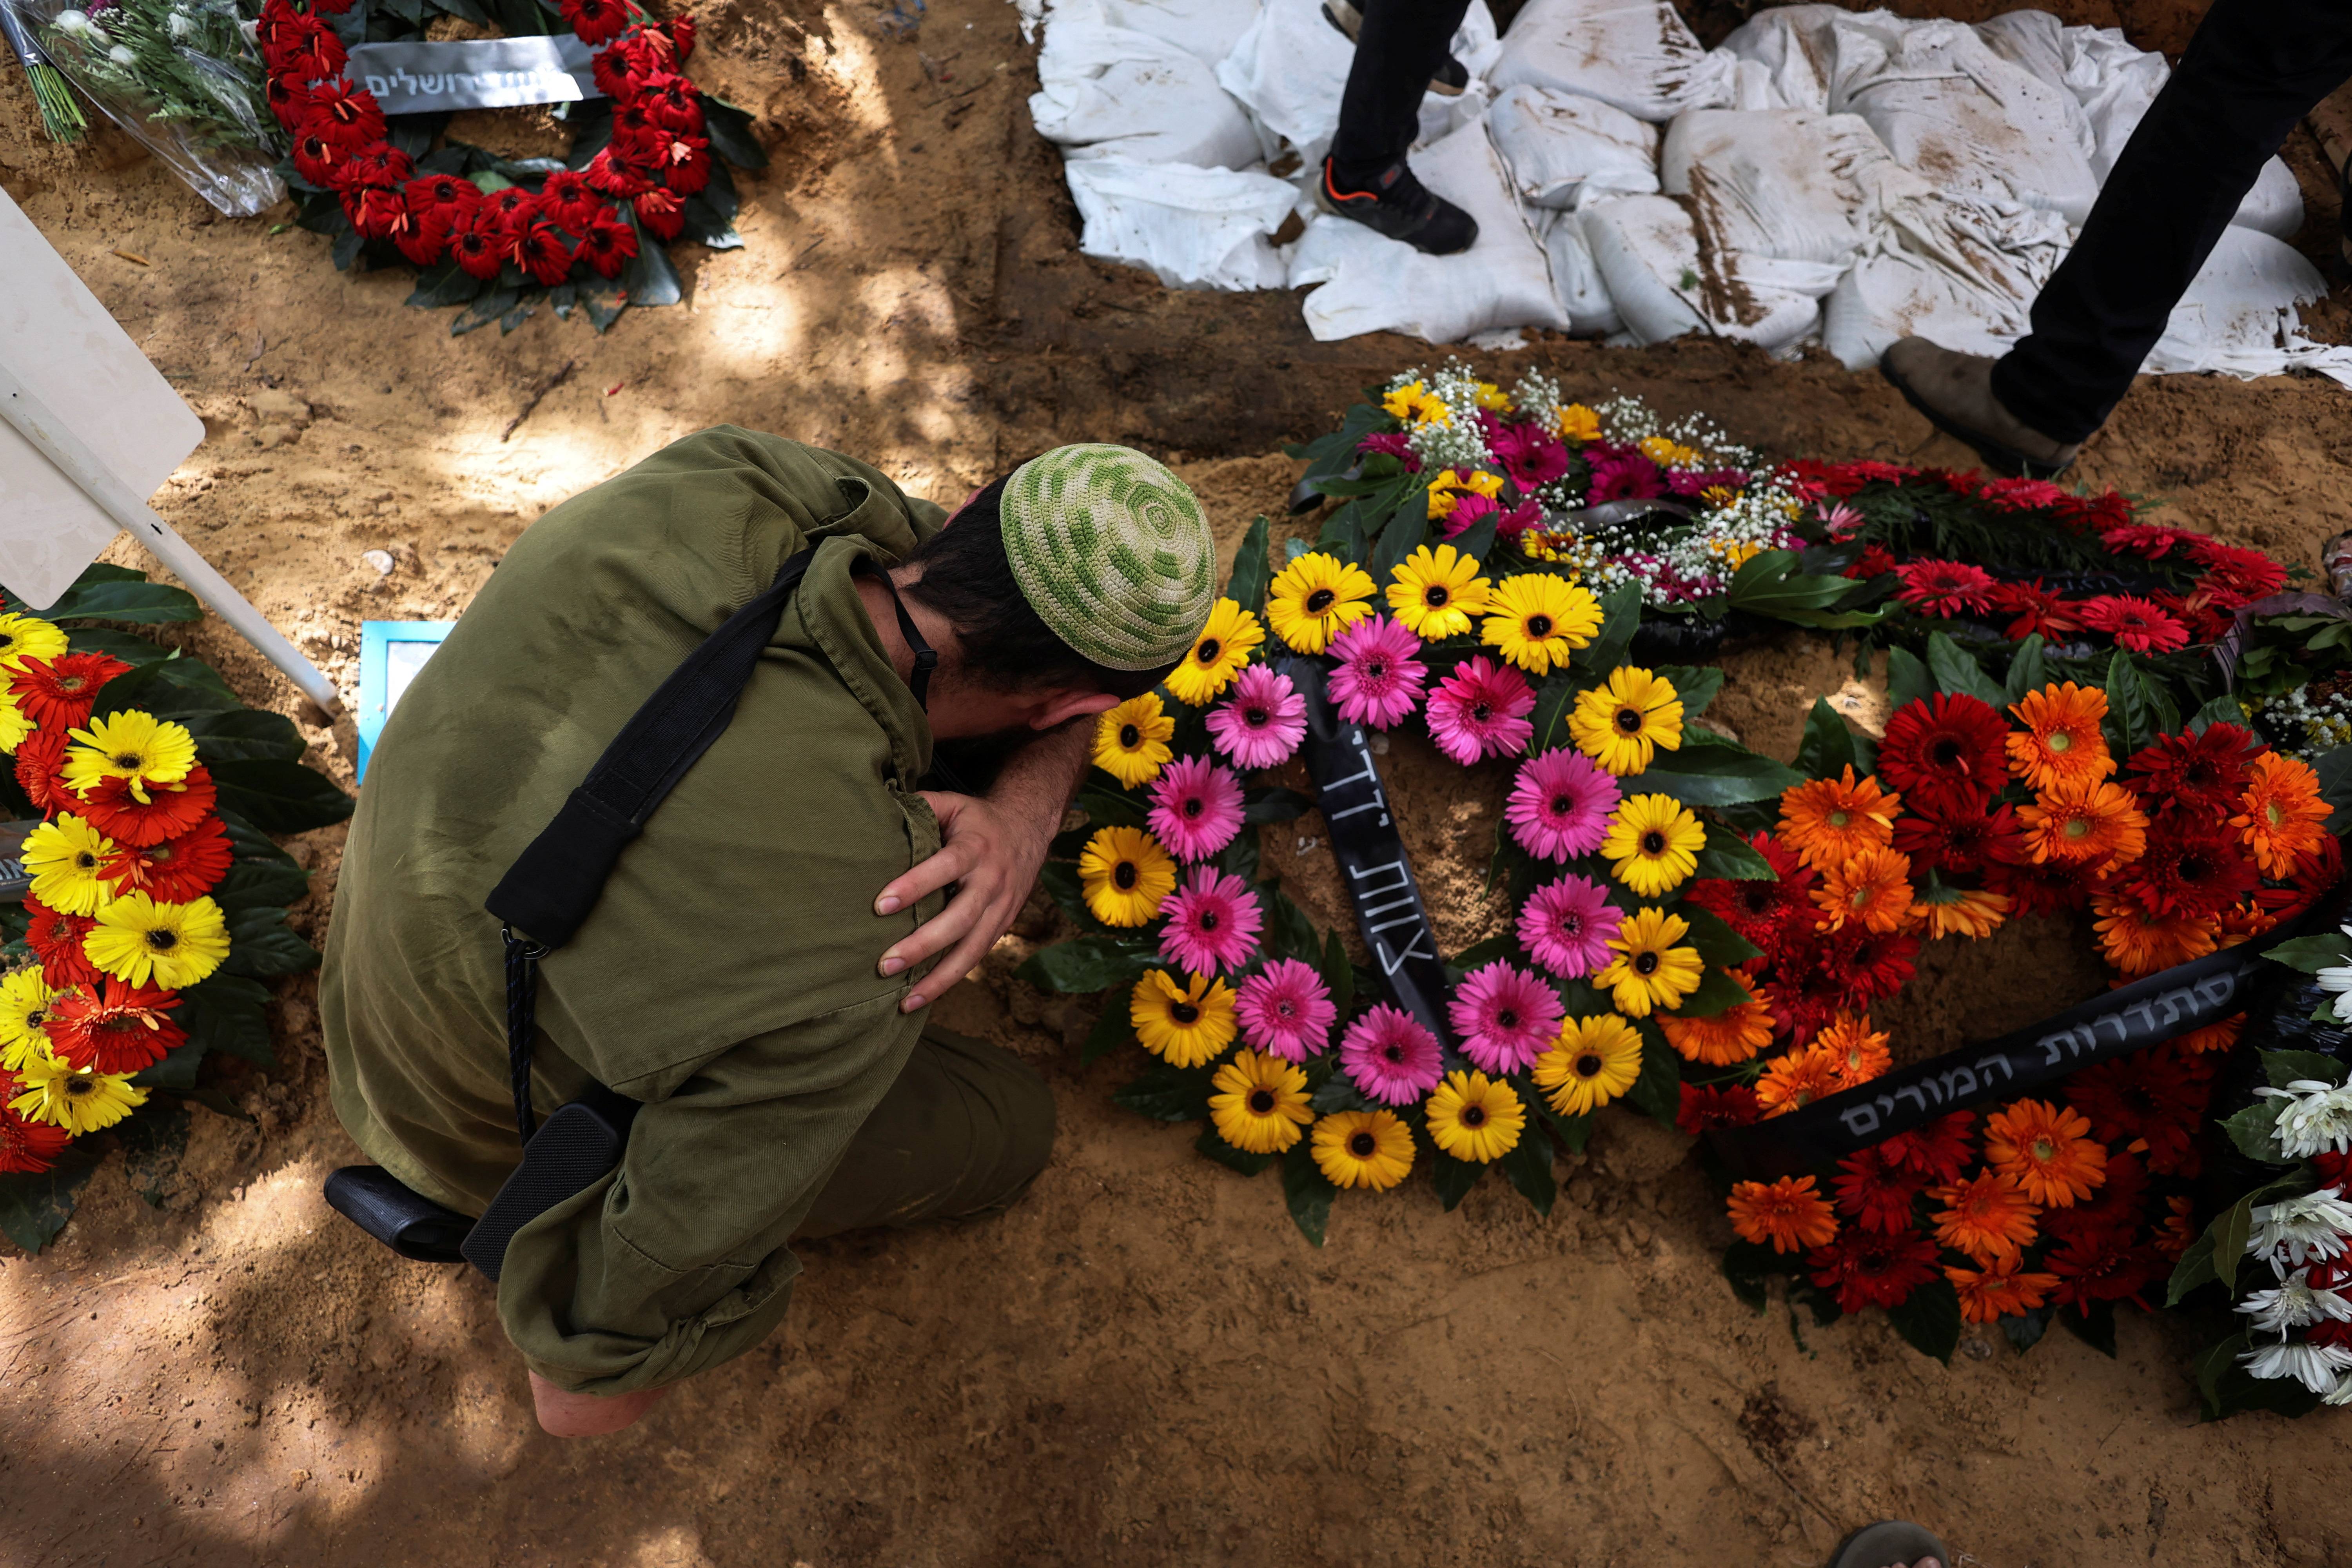 People mourn at the graveside of Amichai Vanino, a soldier who was killed following an attack by Hamas gunmen from Gaza, at his funeral at Mount Herzl Military Cemetery in Jerusalem